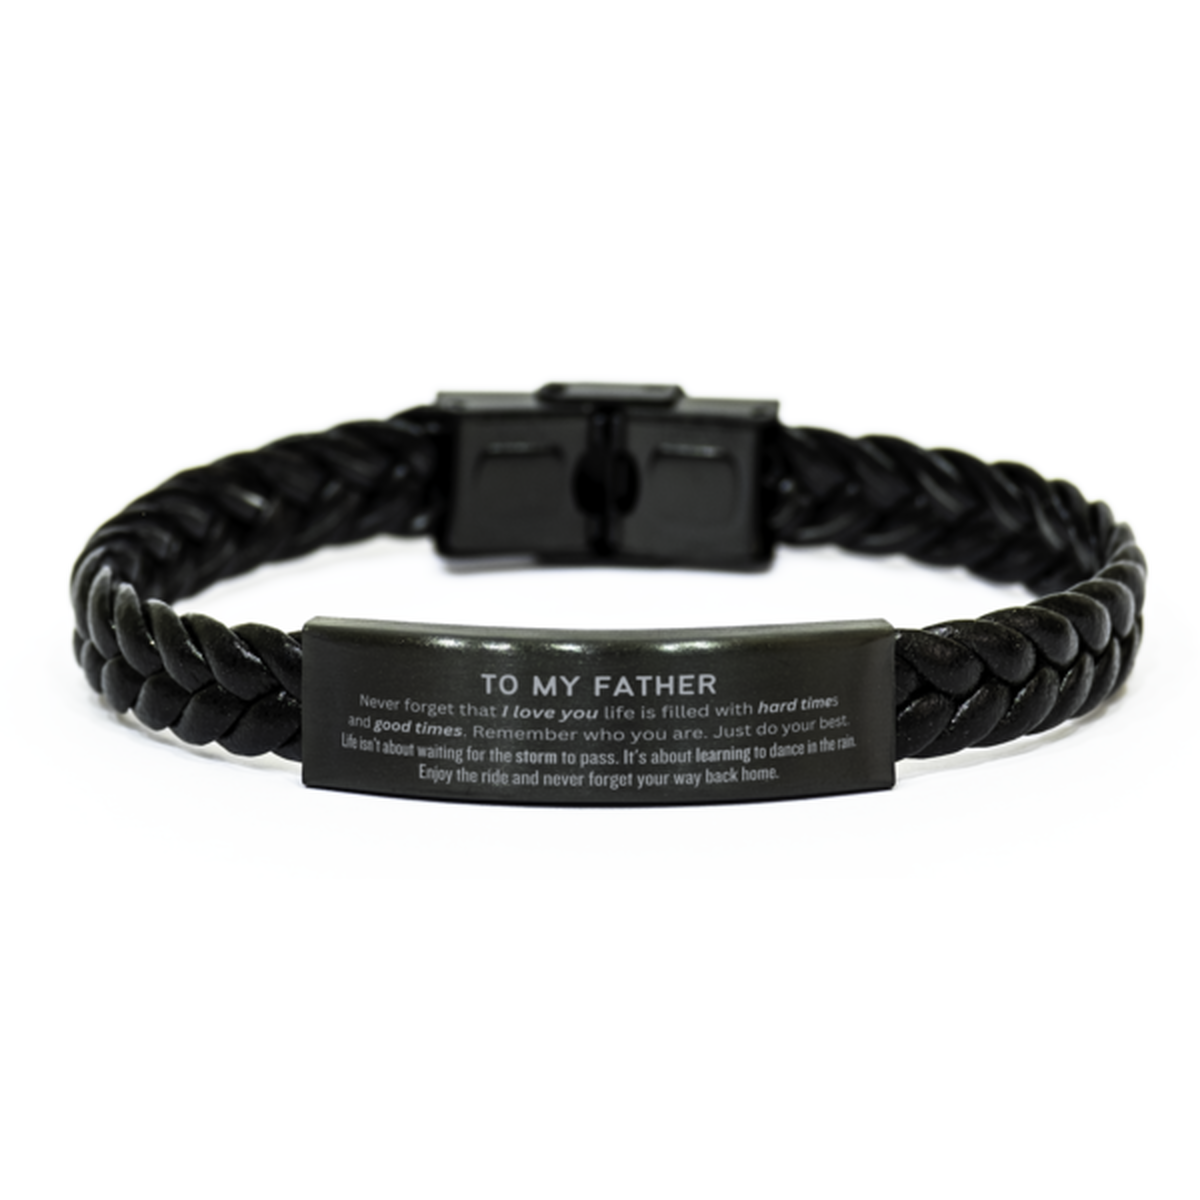 Christmas Father Braided Leather Bracelet Gifts, To My Father Birthday Thank You Gifts For Father, Graduation Unique Gifts For Father To My Father Never forget that I love you life is filled with hard times and good times. Remember who you are. Just do yo